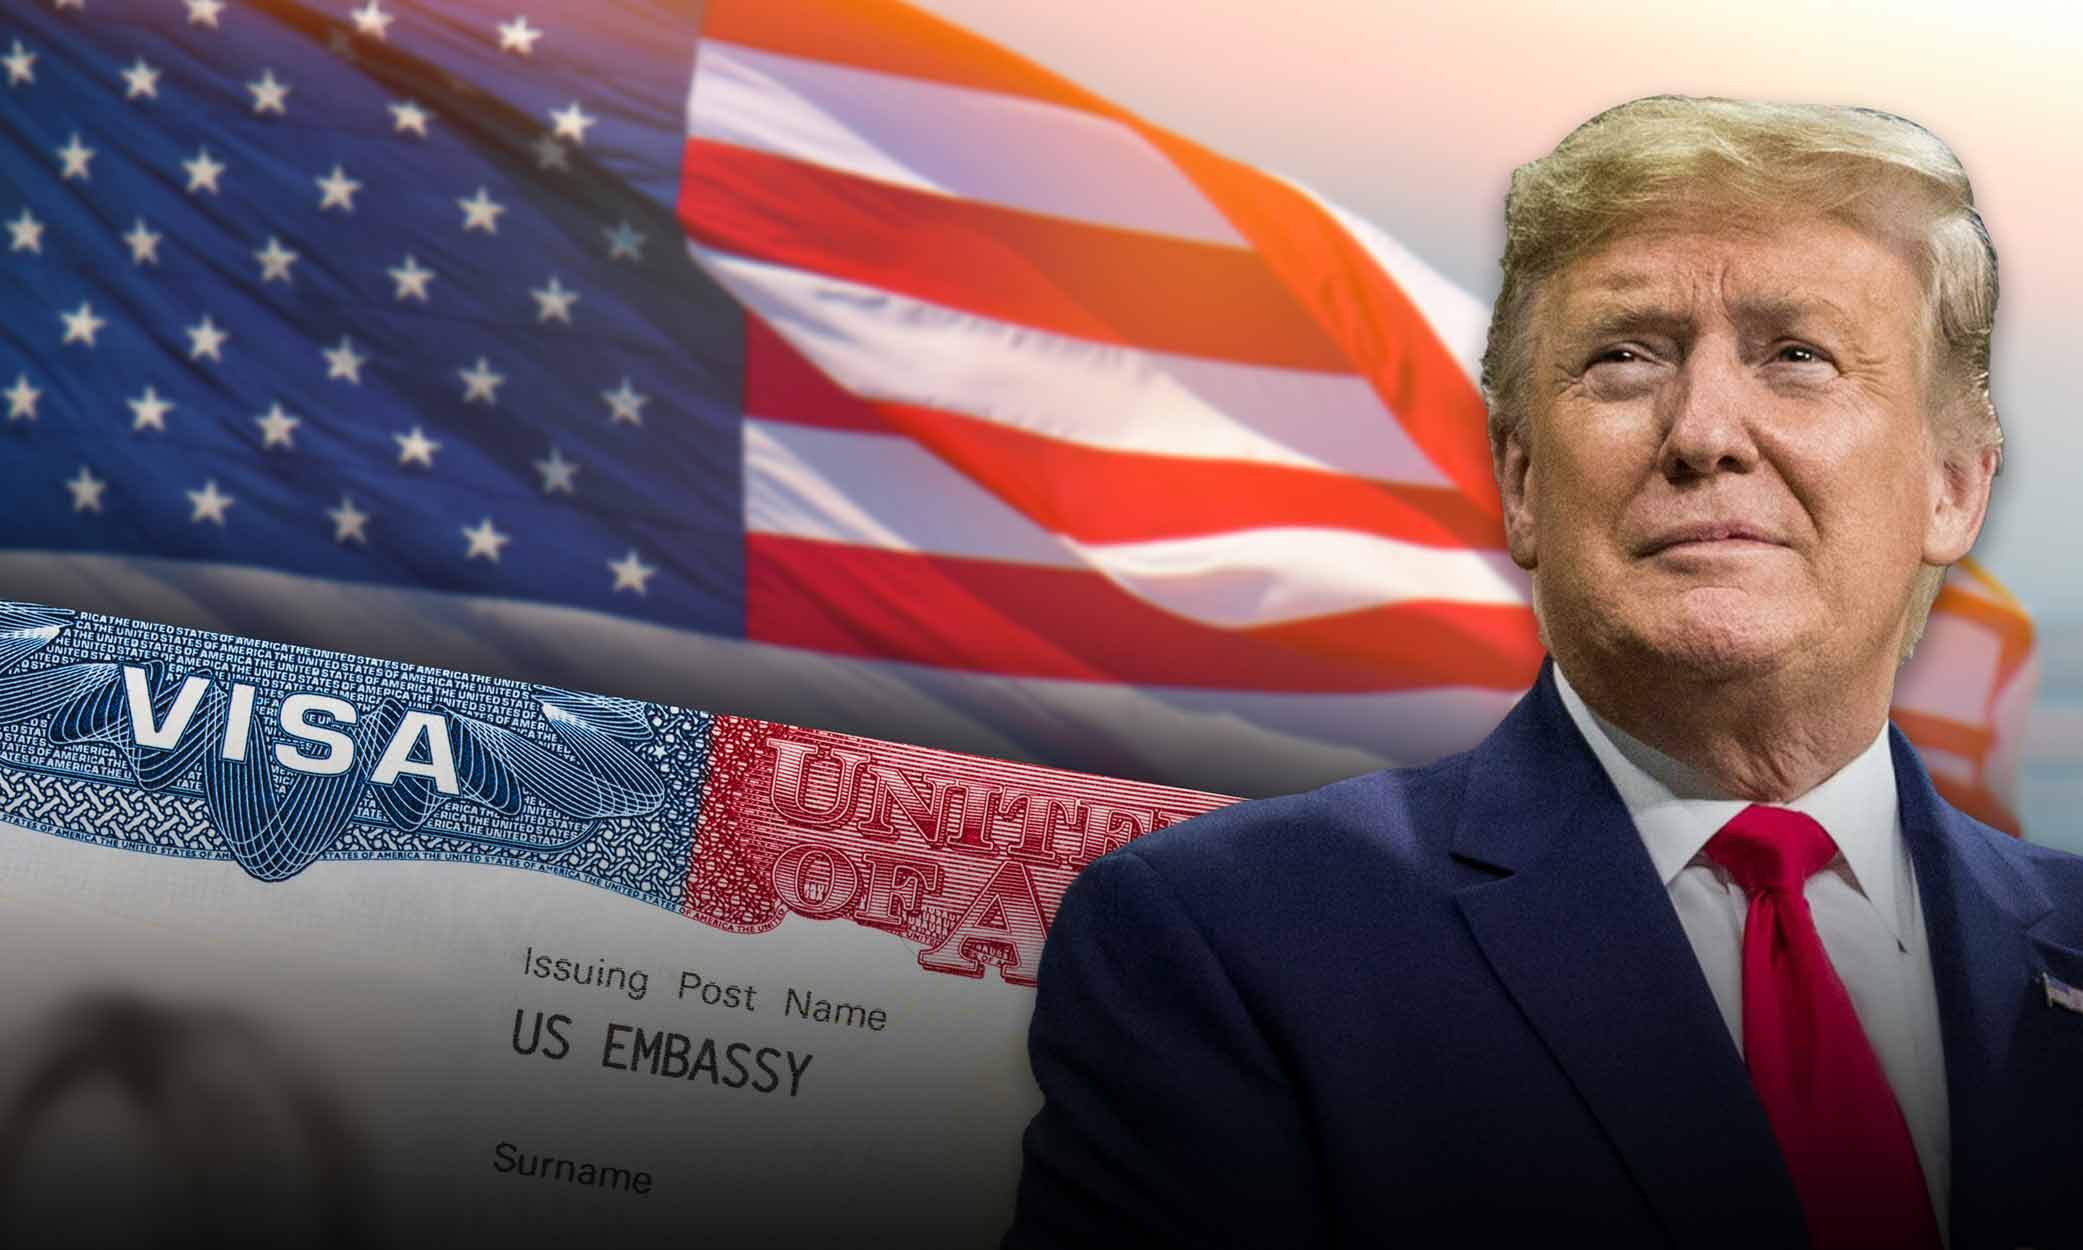 The Trump Immigration Agenda and How It Affects the EB-5